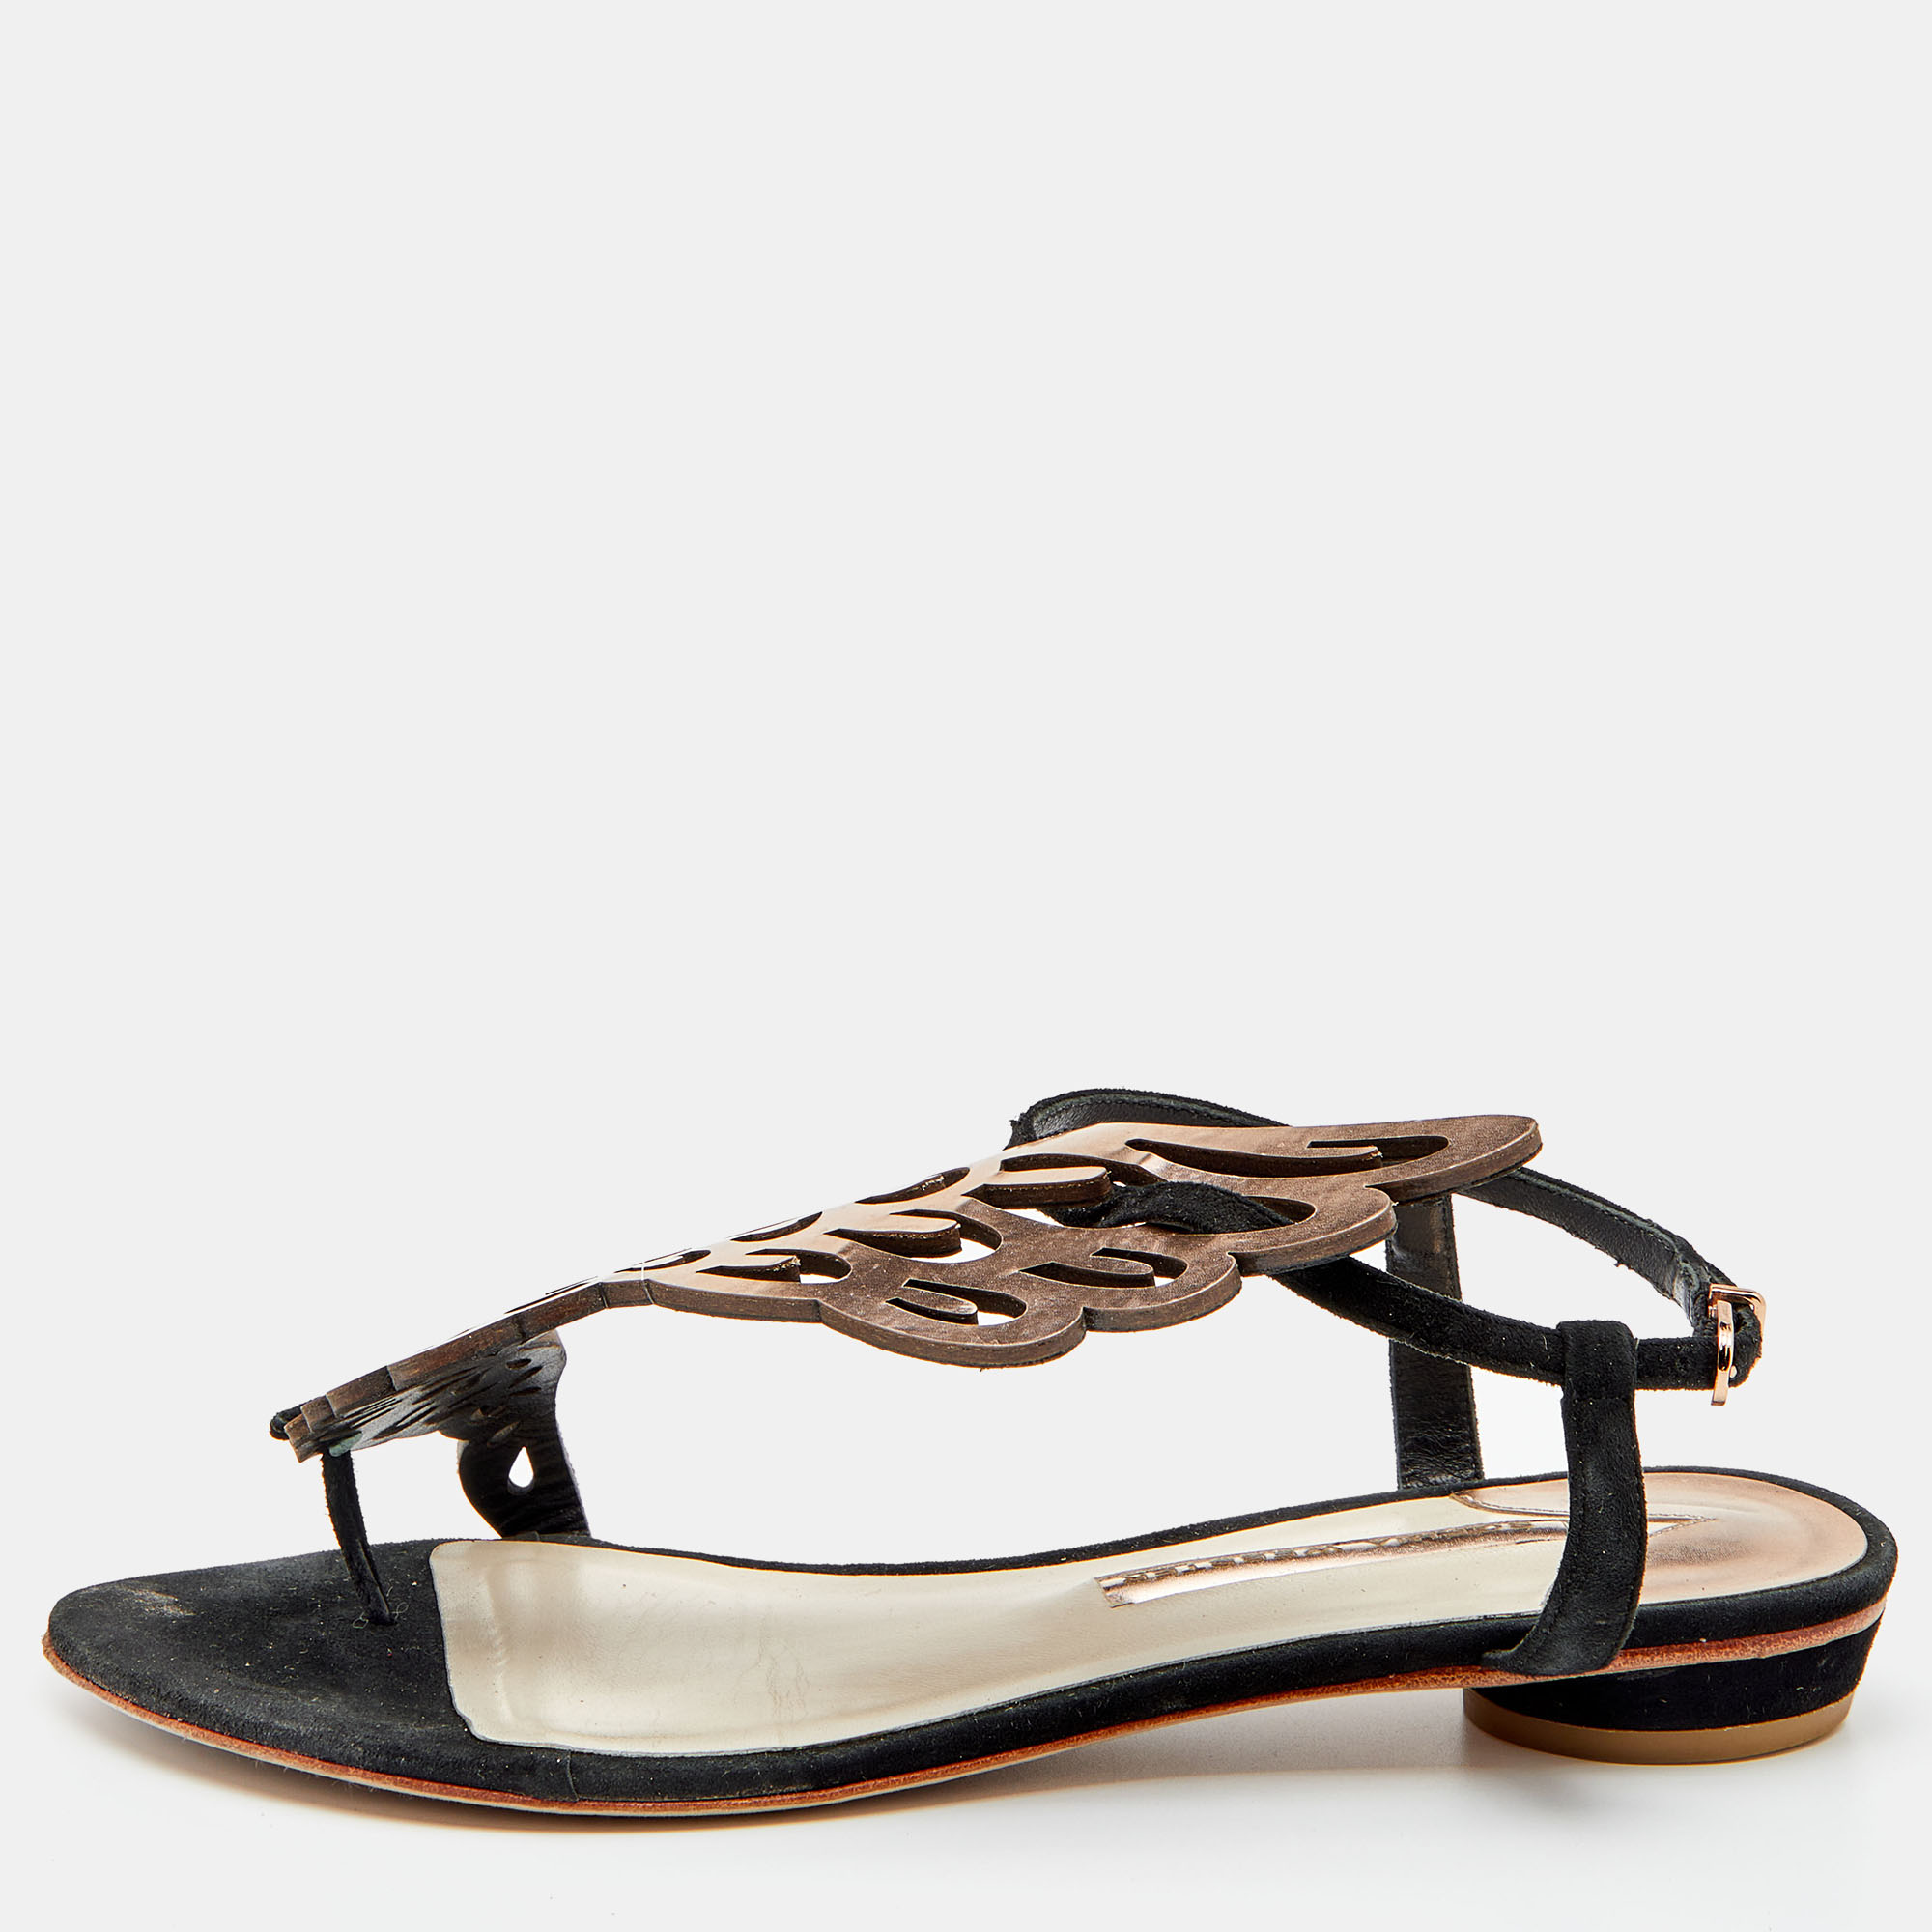 

Sophia Webster Metallic Rose Gold/Black Leather and Suede Seraphina Angel Wing Flat Sandals Size